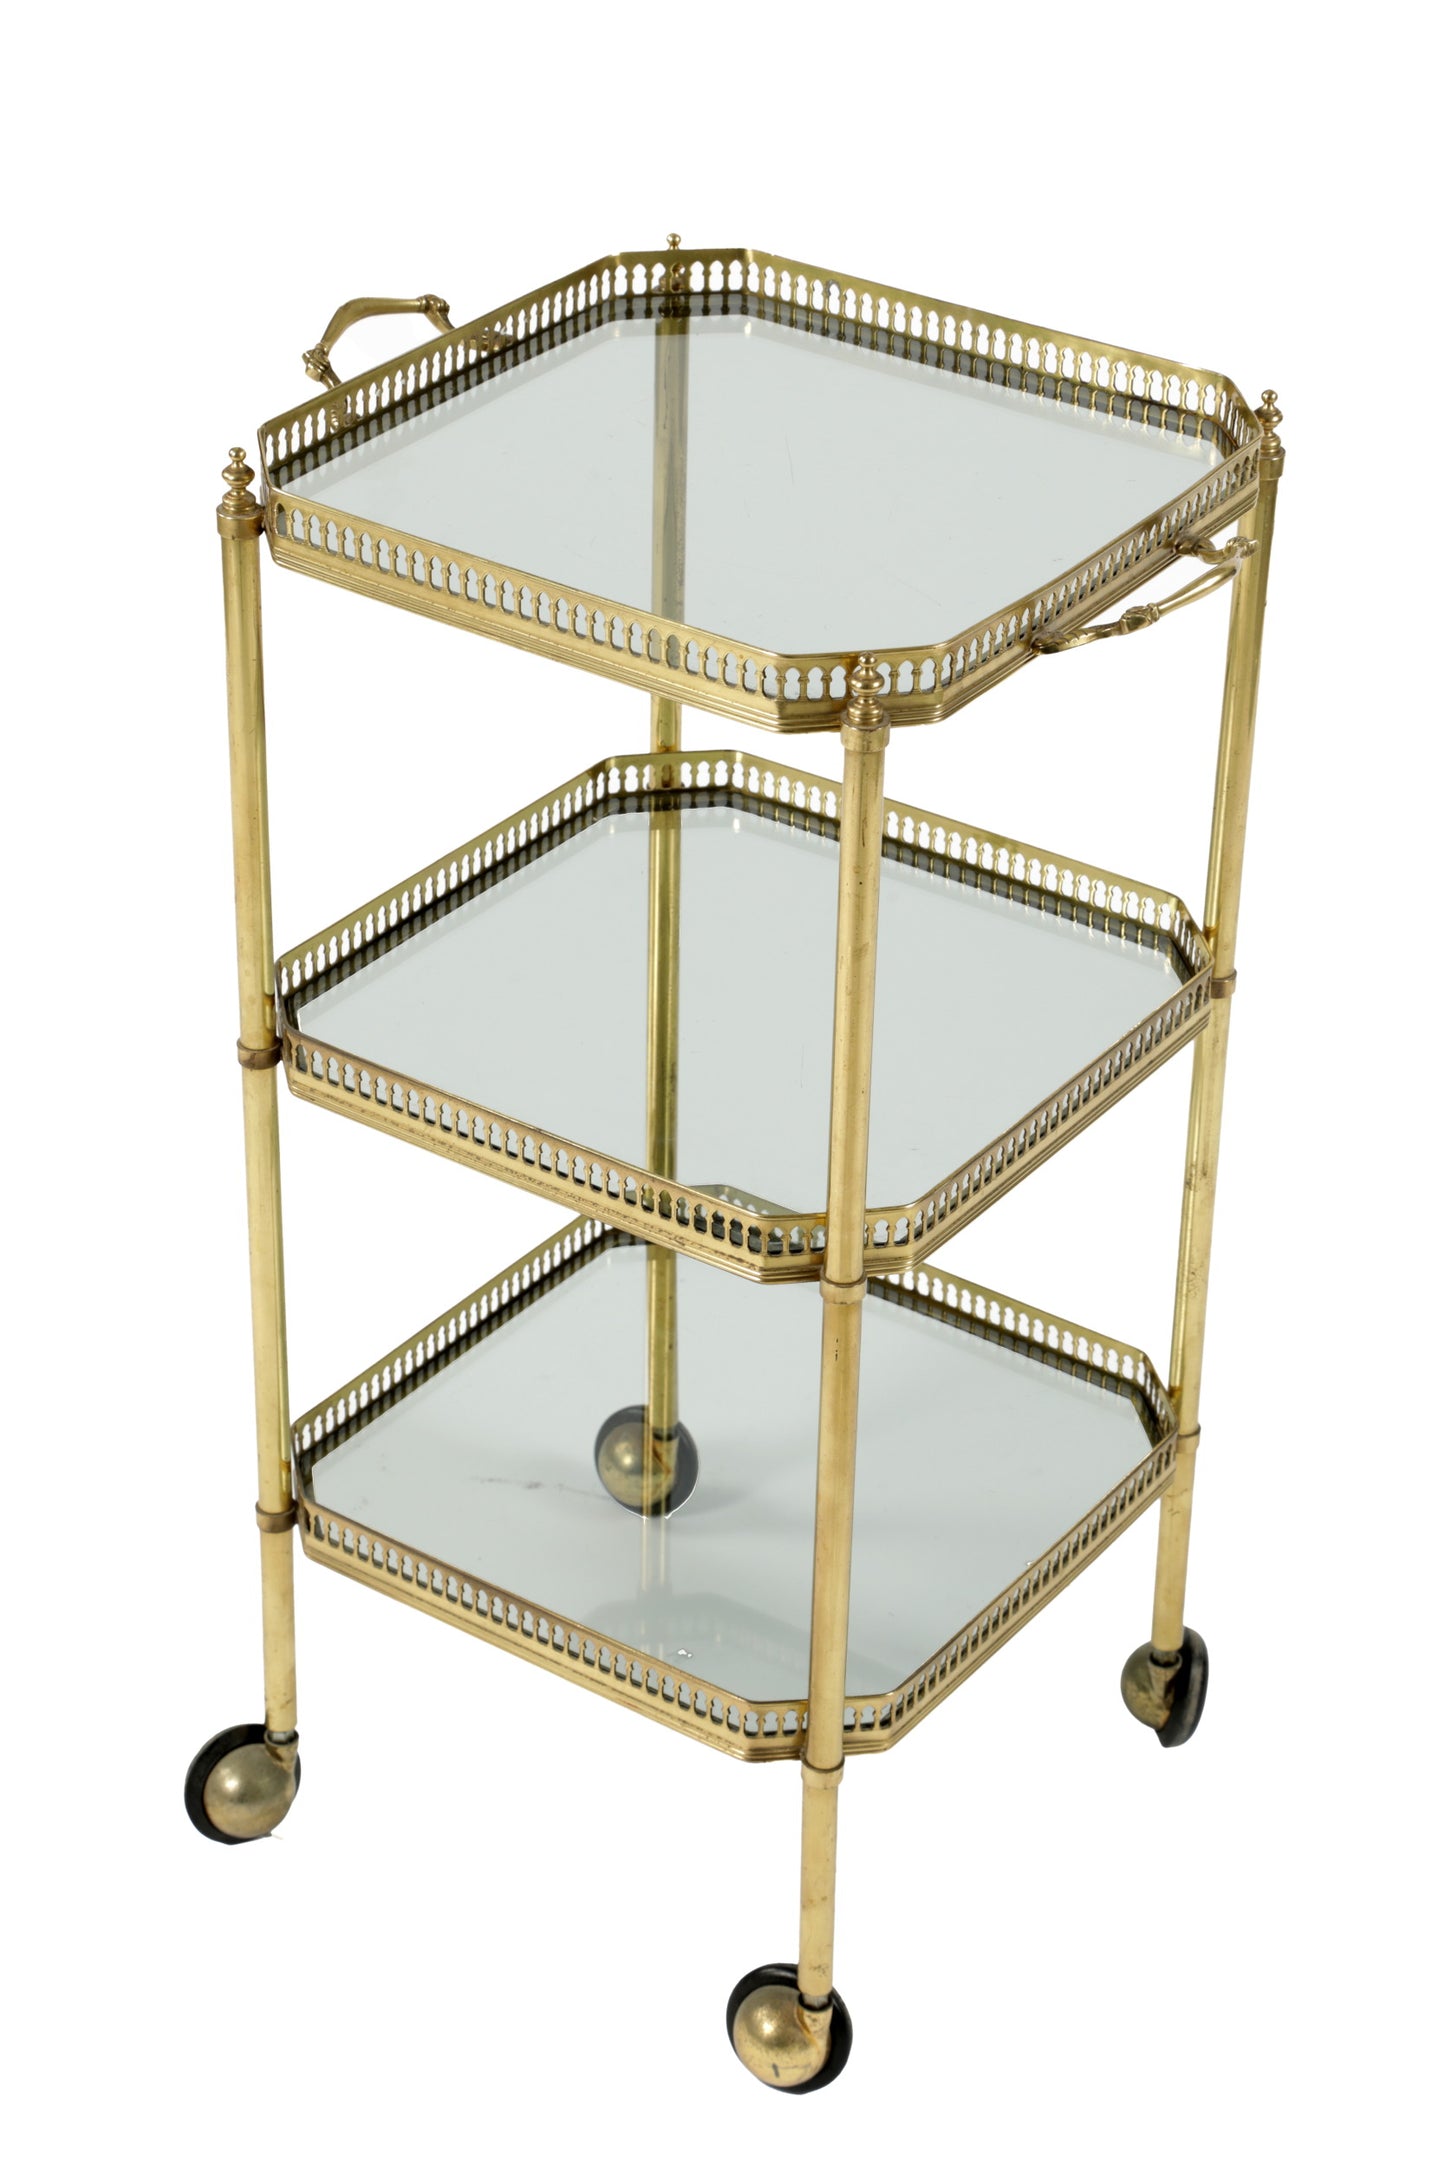 1960s brass trolley with three shelves